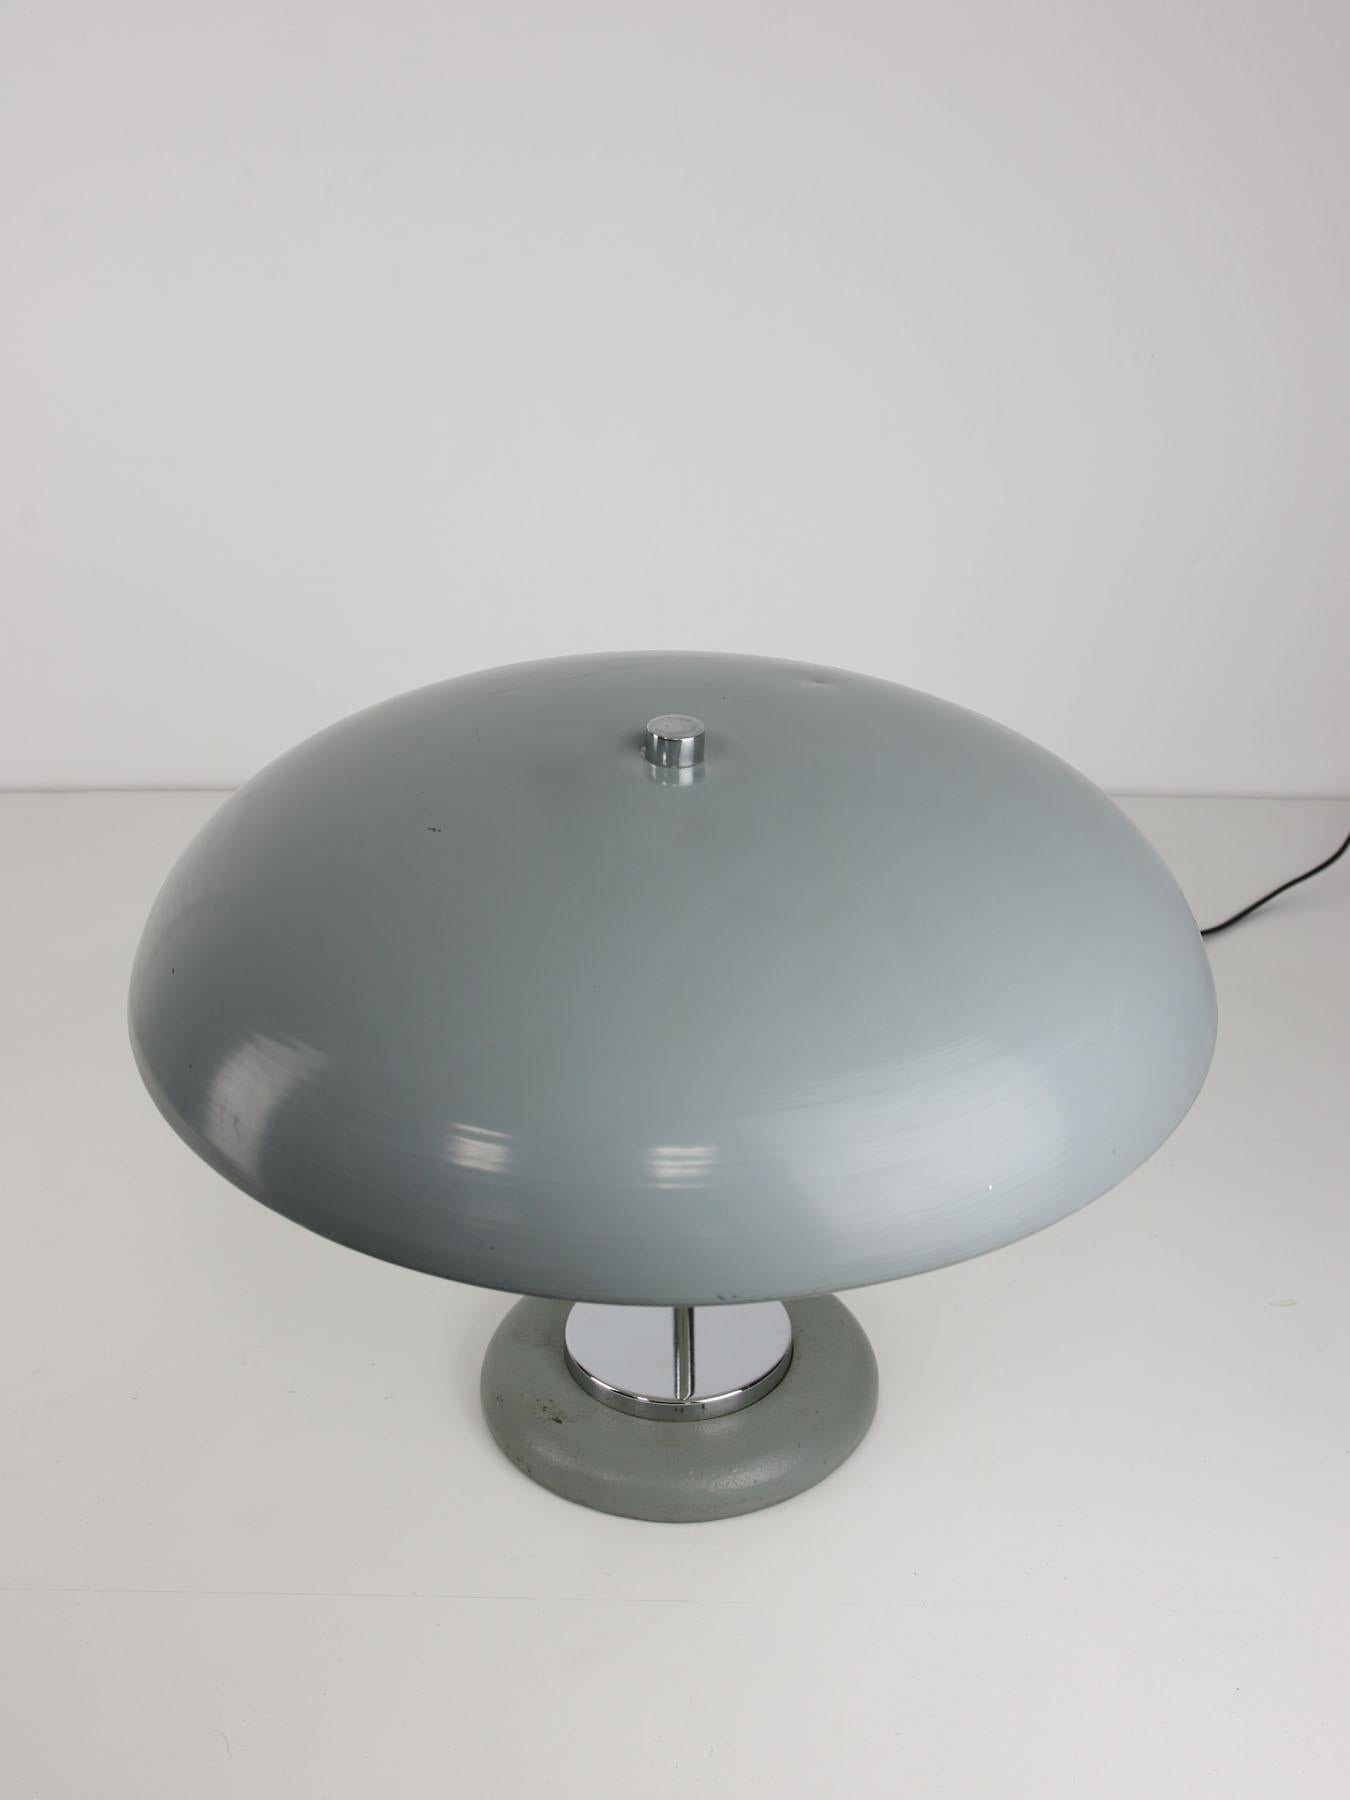 Bauhaus Saucer Table Lamp with Big Button For Sale 2